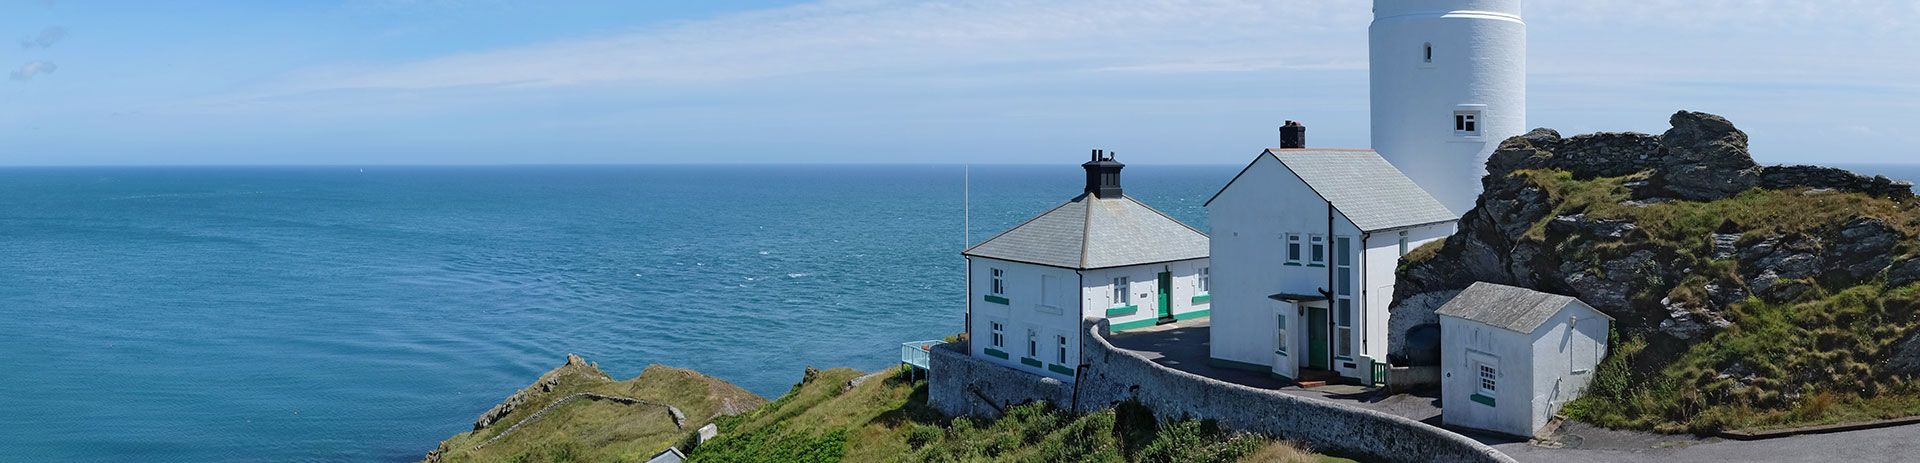 an aerial view of start point lighthouse on a cliff overlooking the ocean .